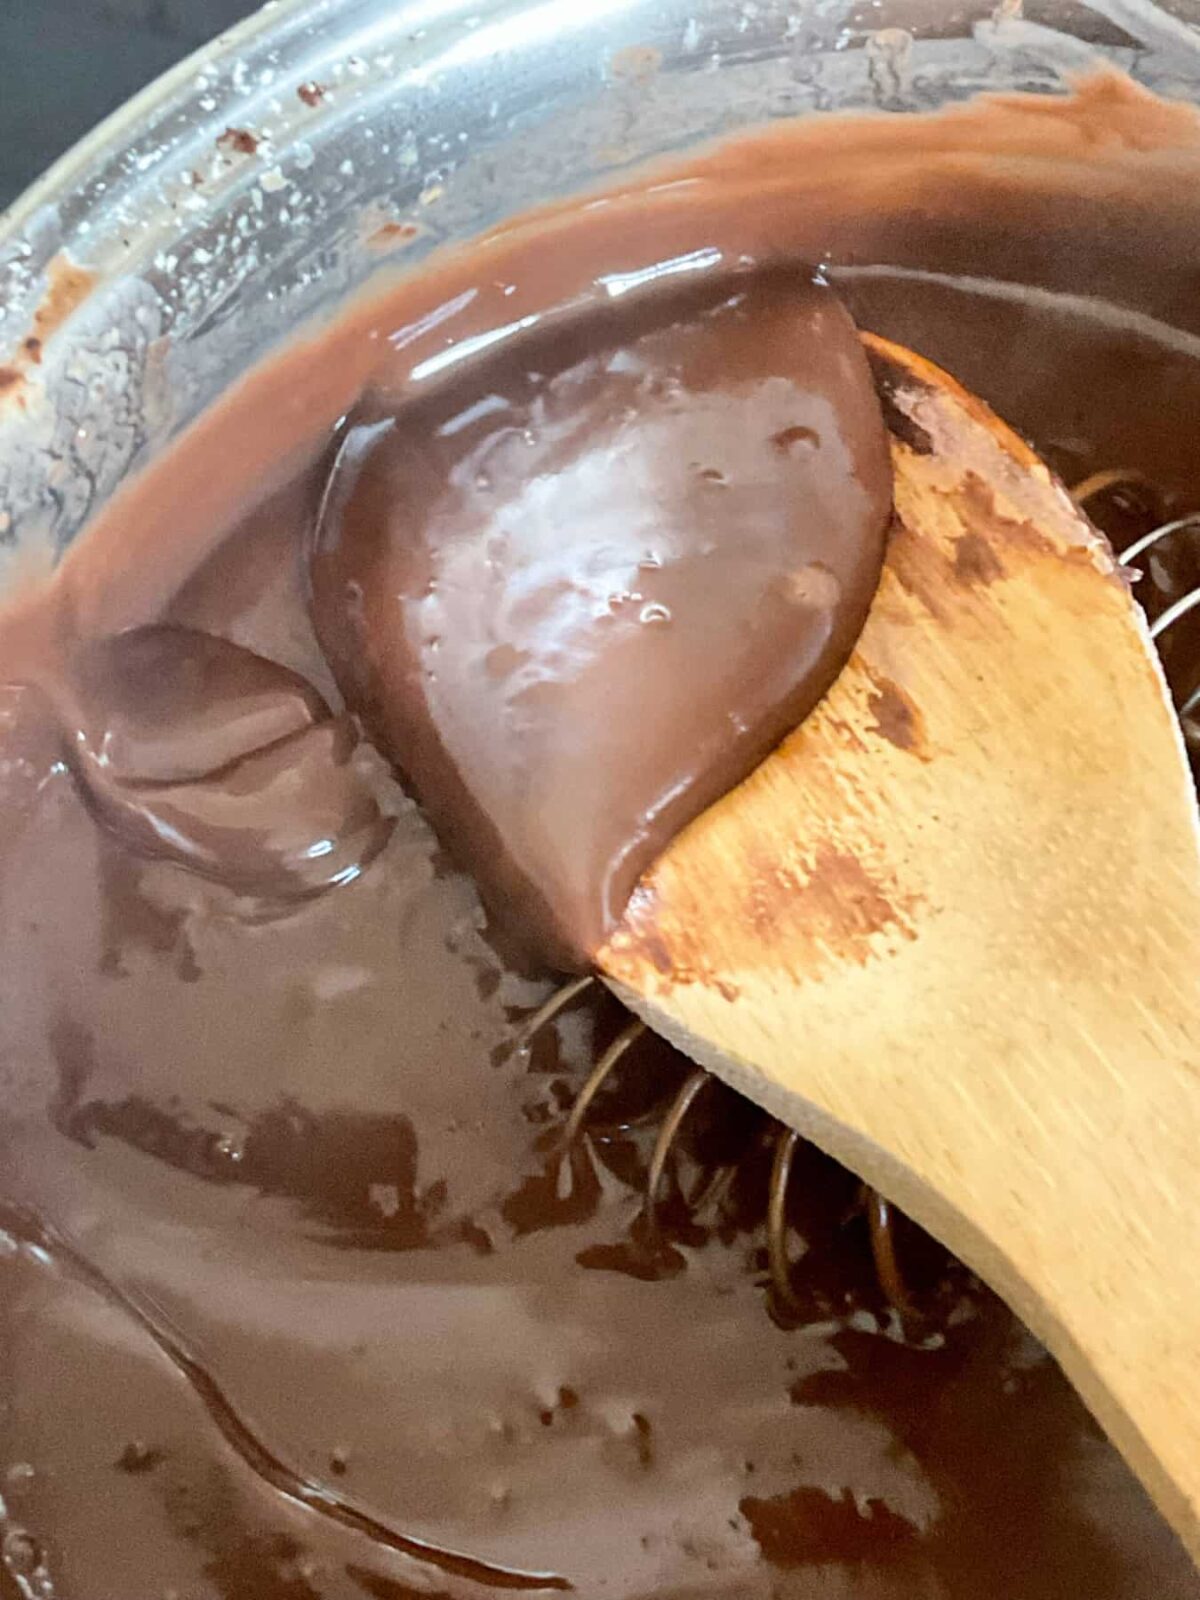 Chocolate custard pudding cooked and thick in the saucepan with wooden spoon lifting some pudding up.